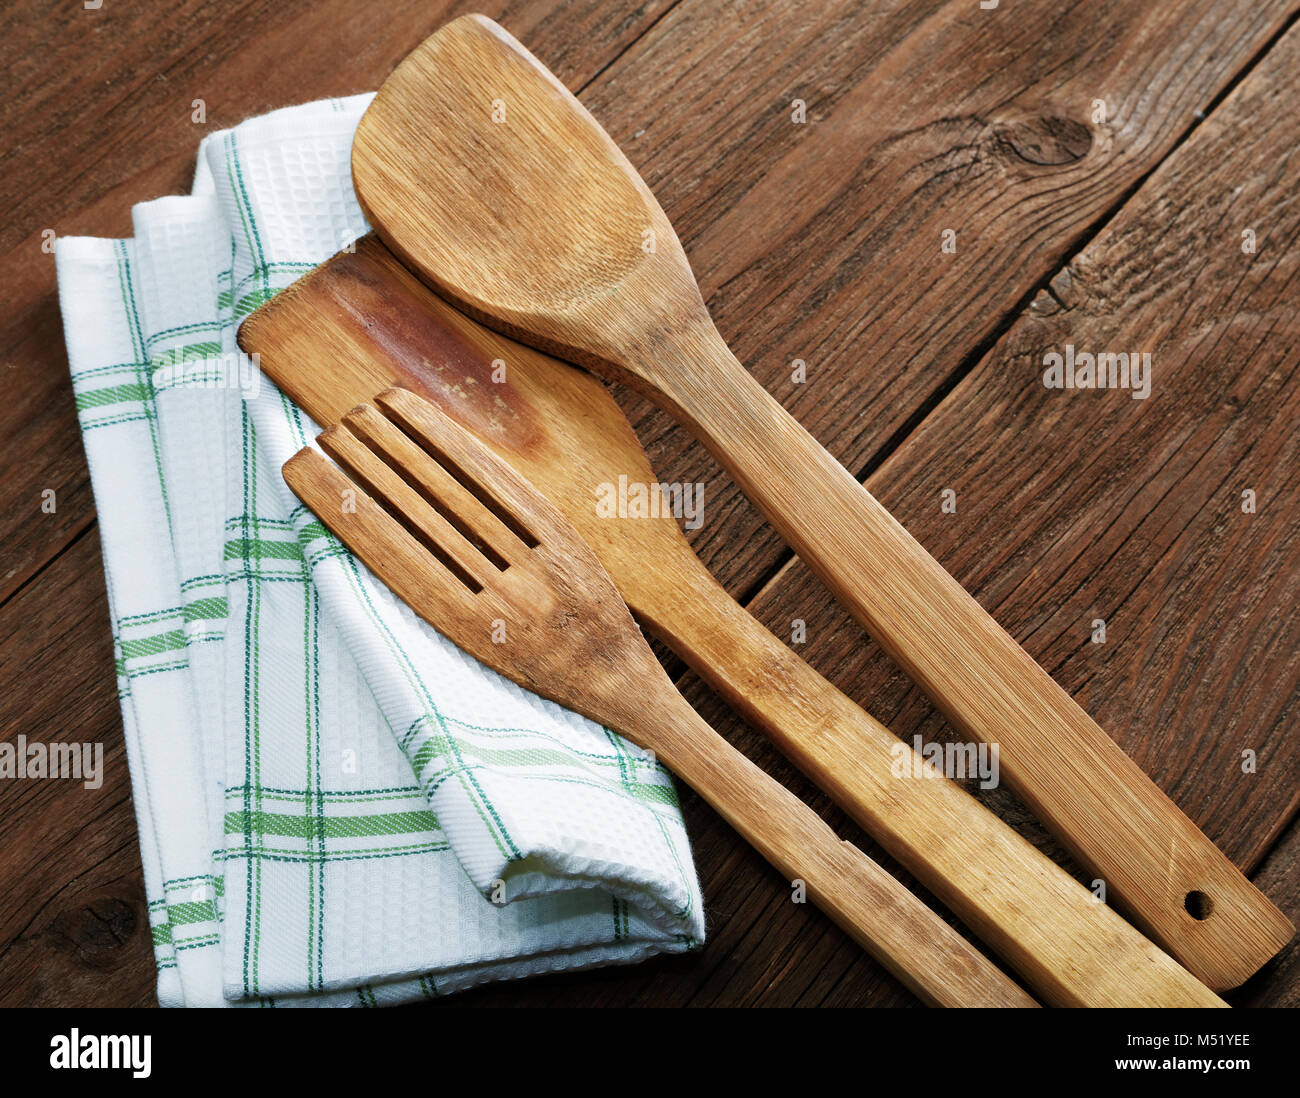 kitchen towels and blades for meat on the table Stock Photo